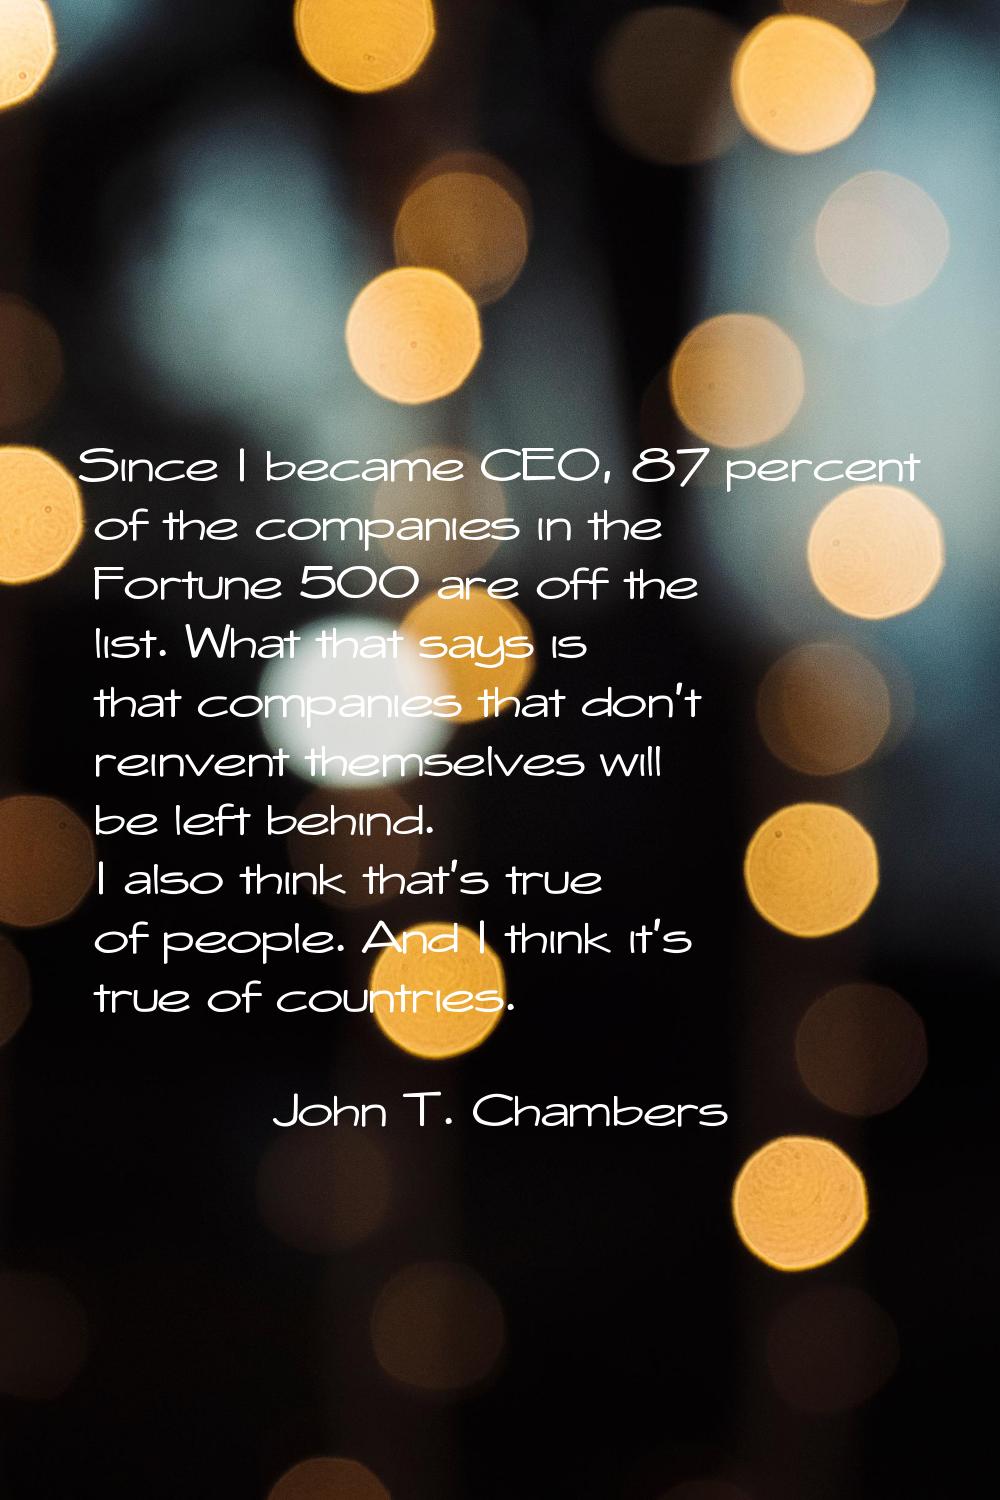 Since I became CEO, 87 percent of the companies in the Fortune 500 are off the list. What that says